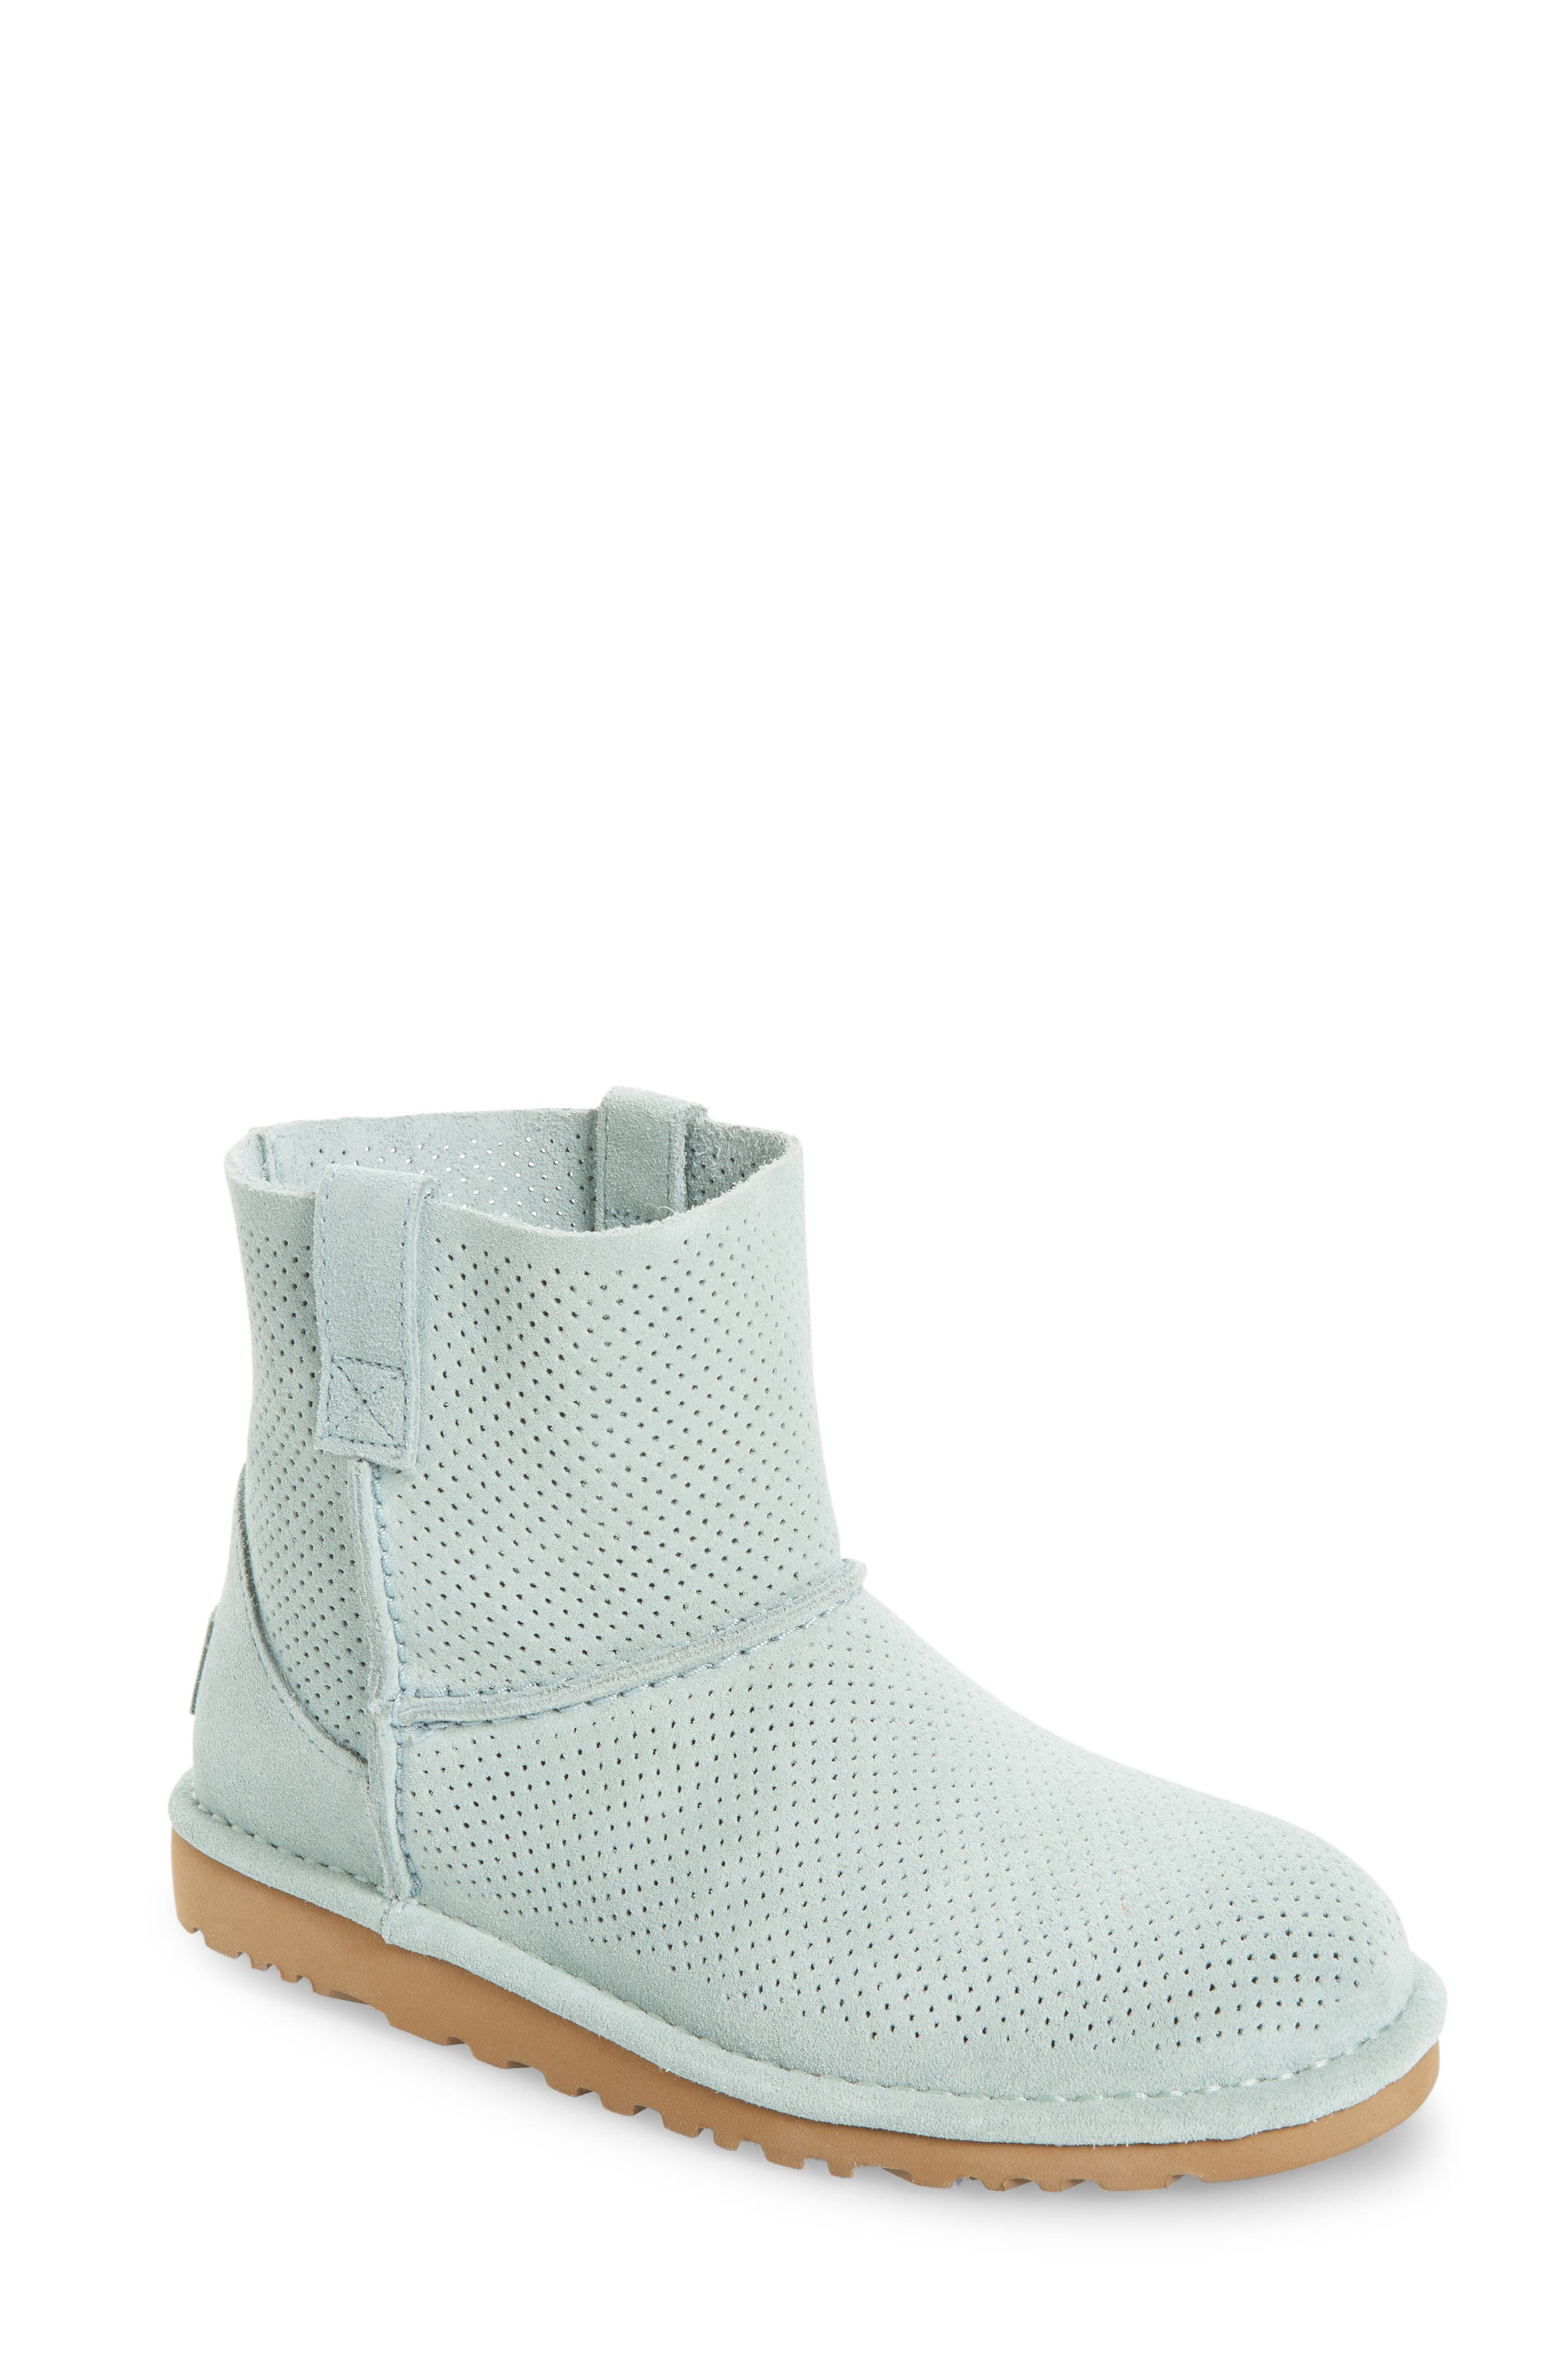 ugg unlined perforated boot